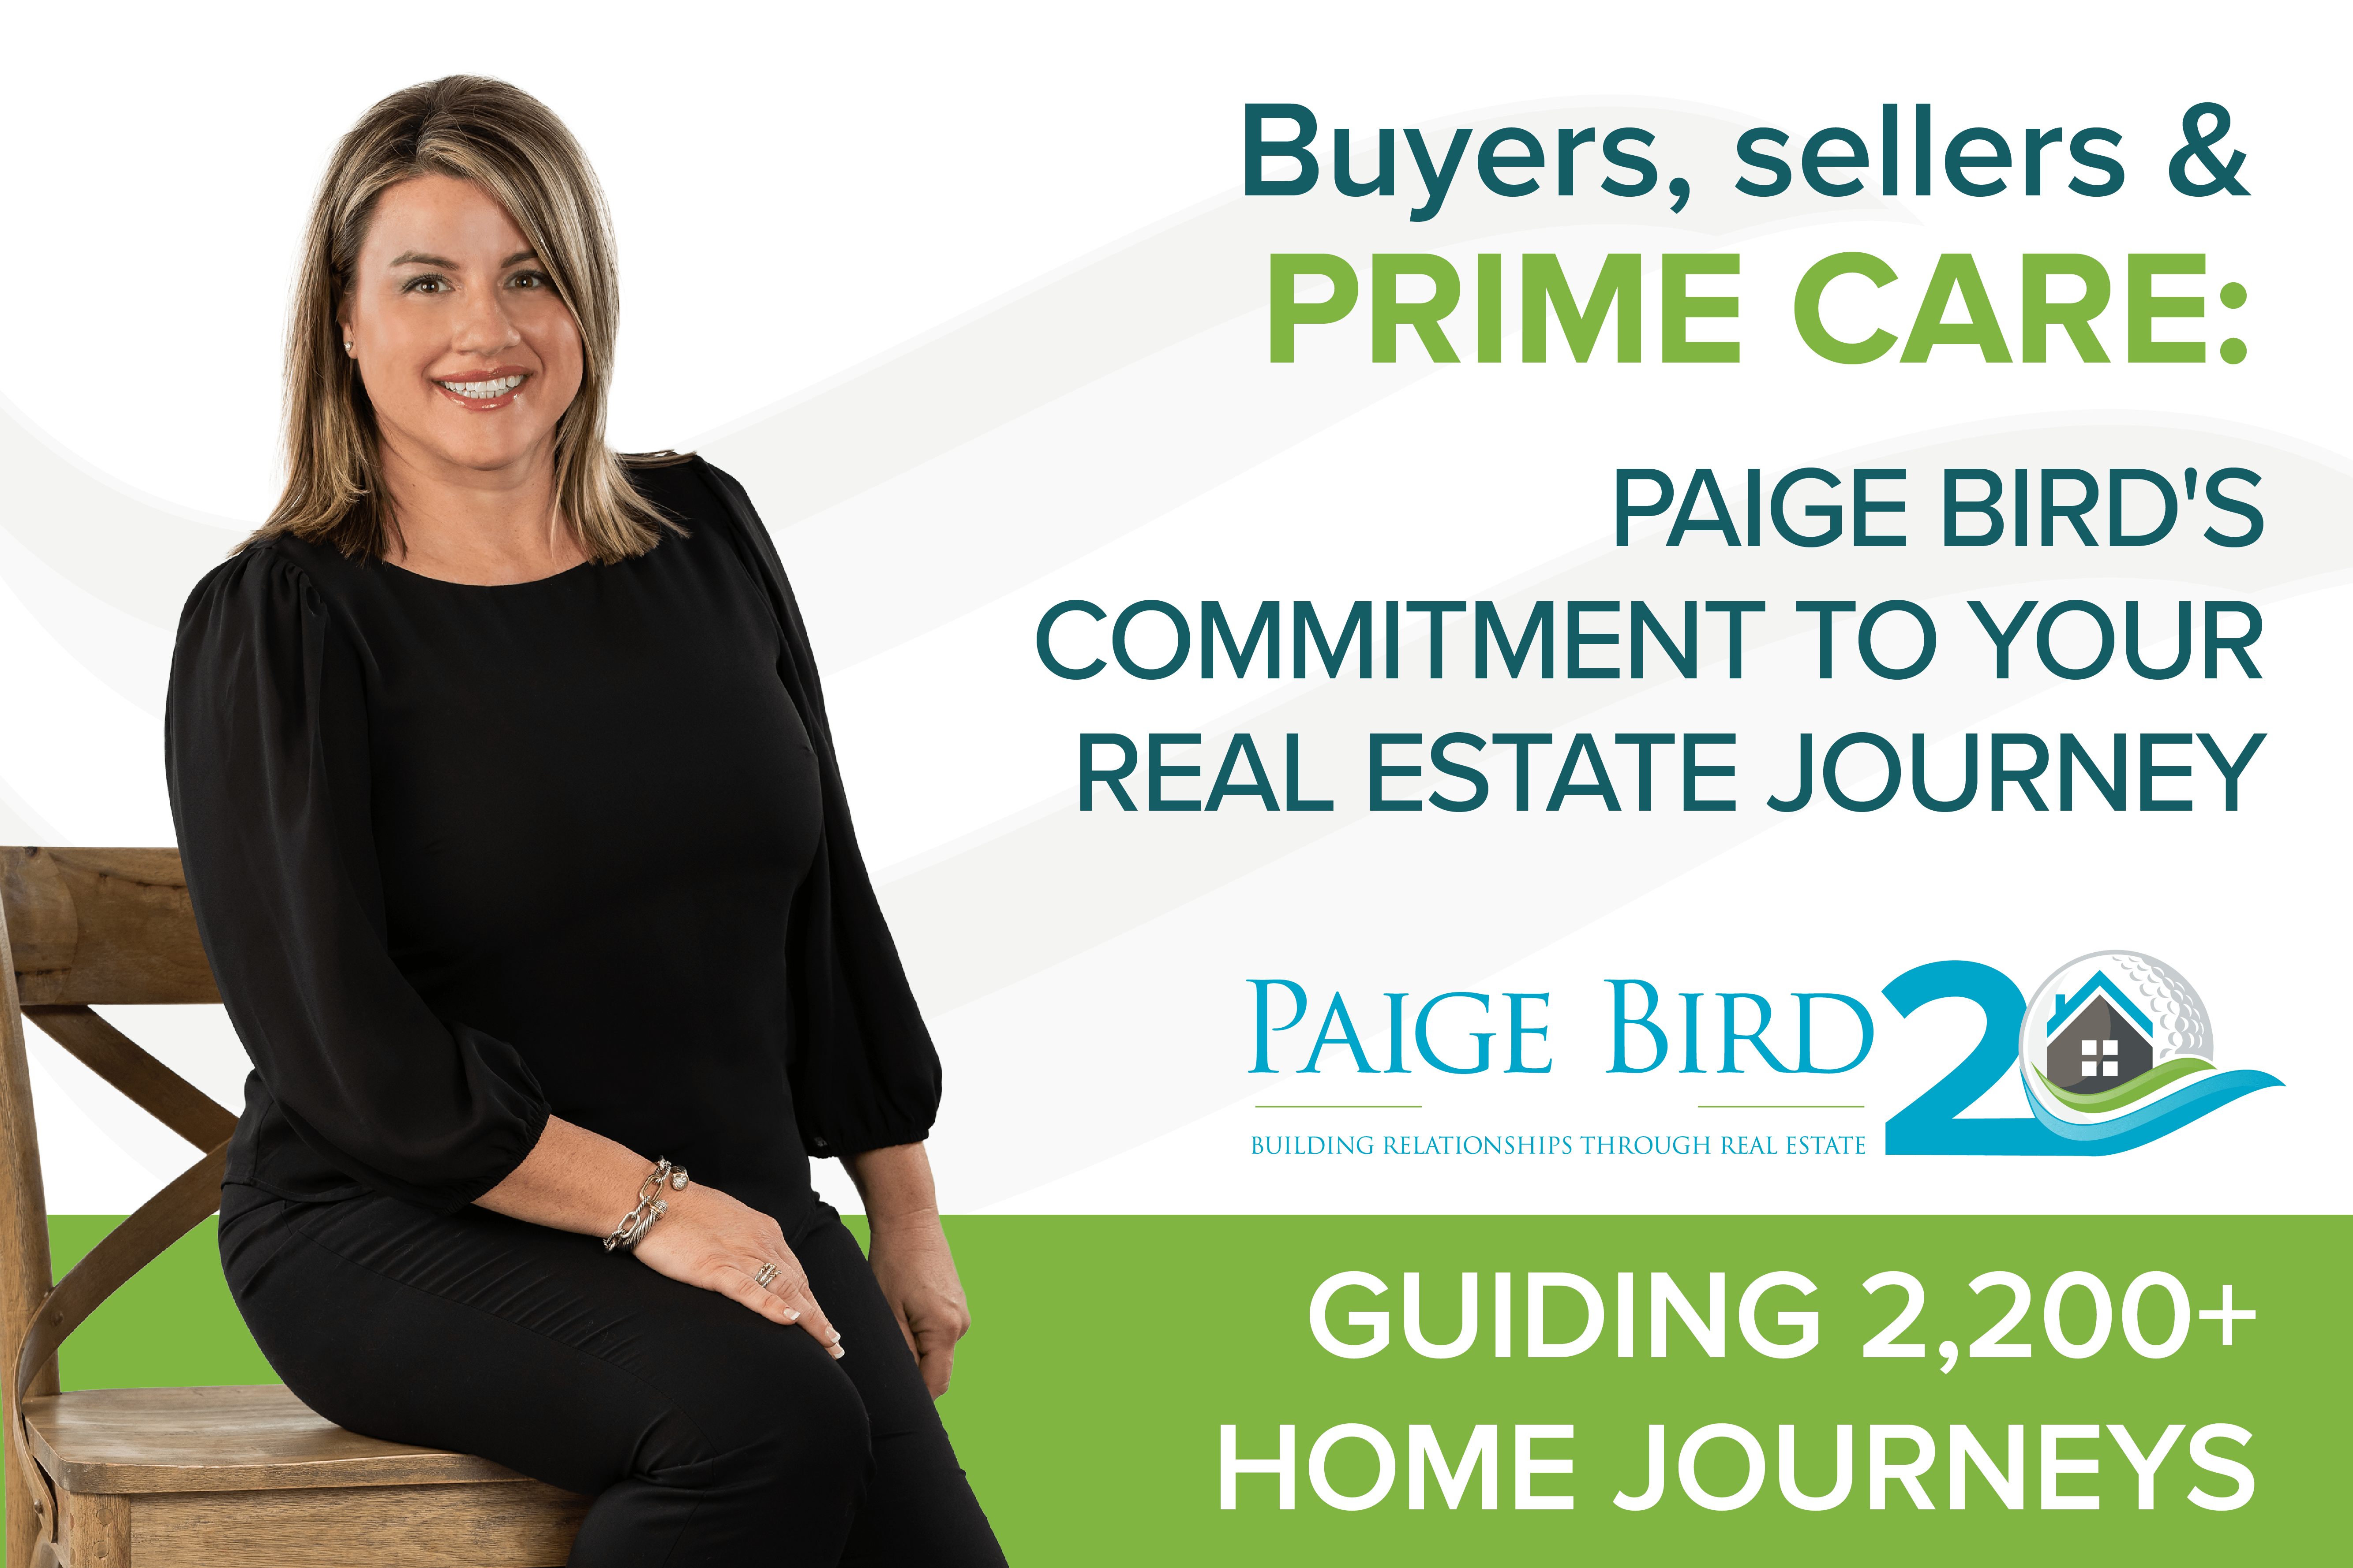 Buyers, Sellers, and PRIME CARE: Paige Bird’s Commitment to Your Real Estate Journey